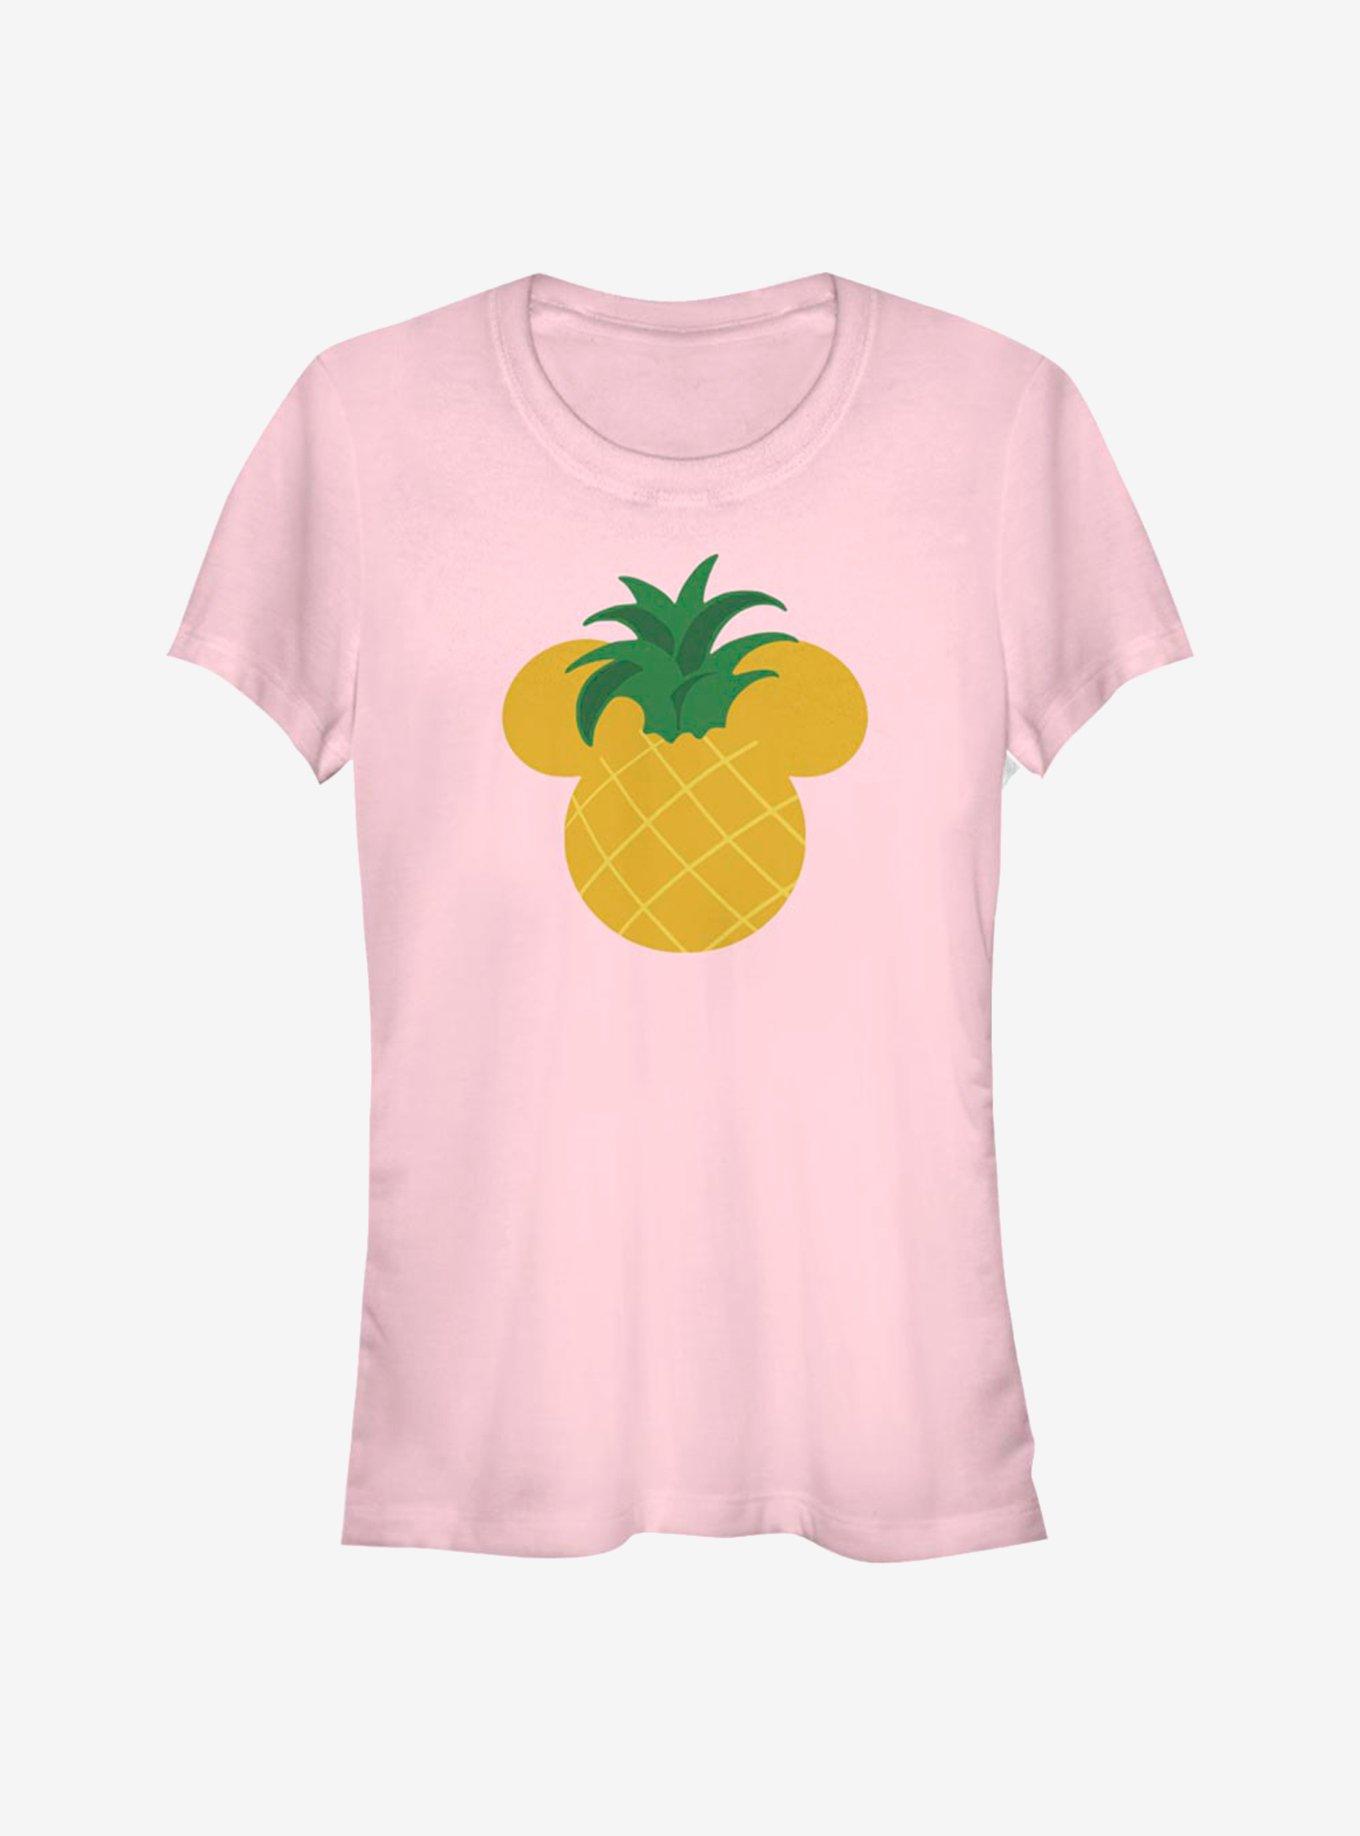 Disney Mickey Mouse Pineapple Ears Girls T-Shirt - PINK | Hot Topic